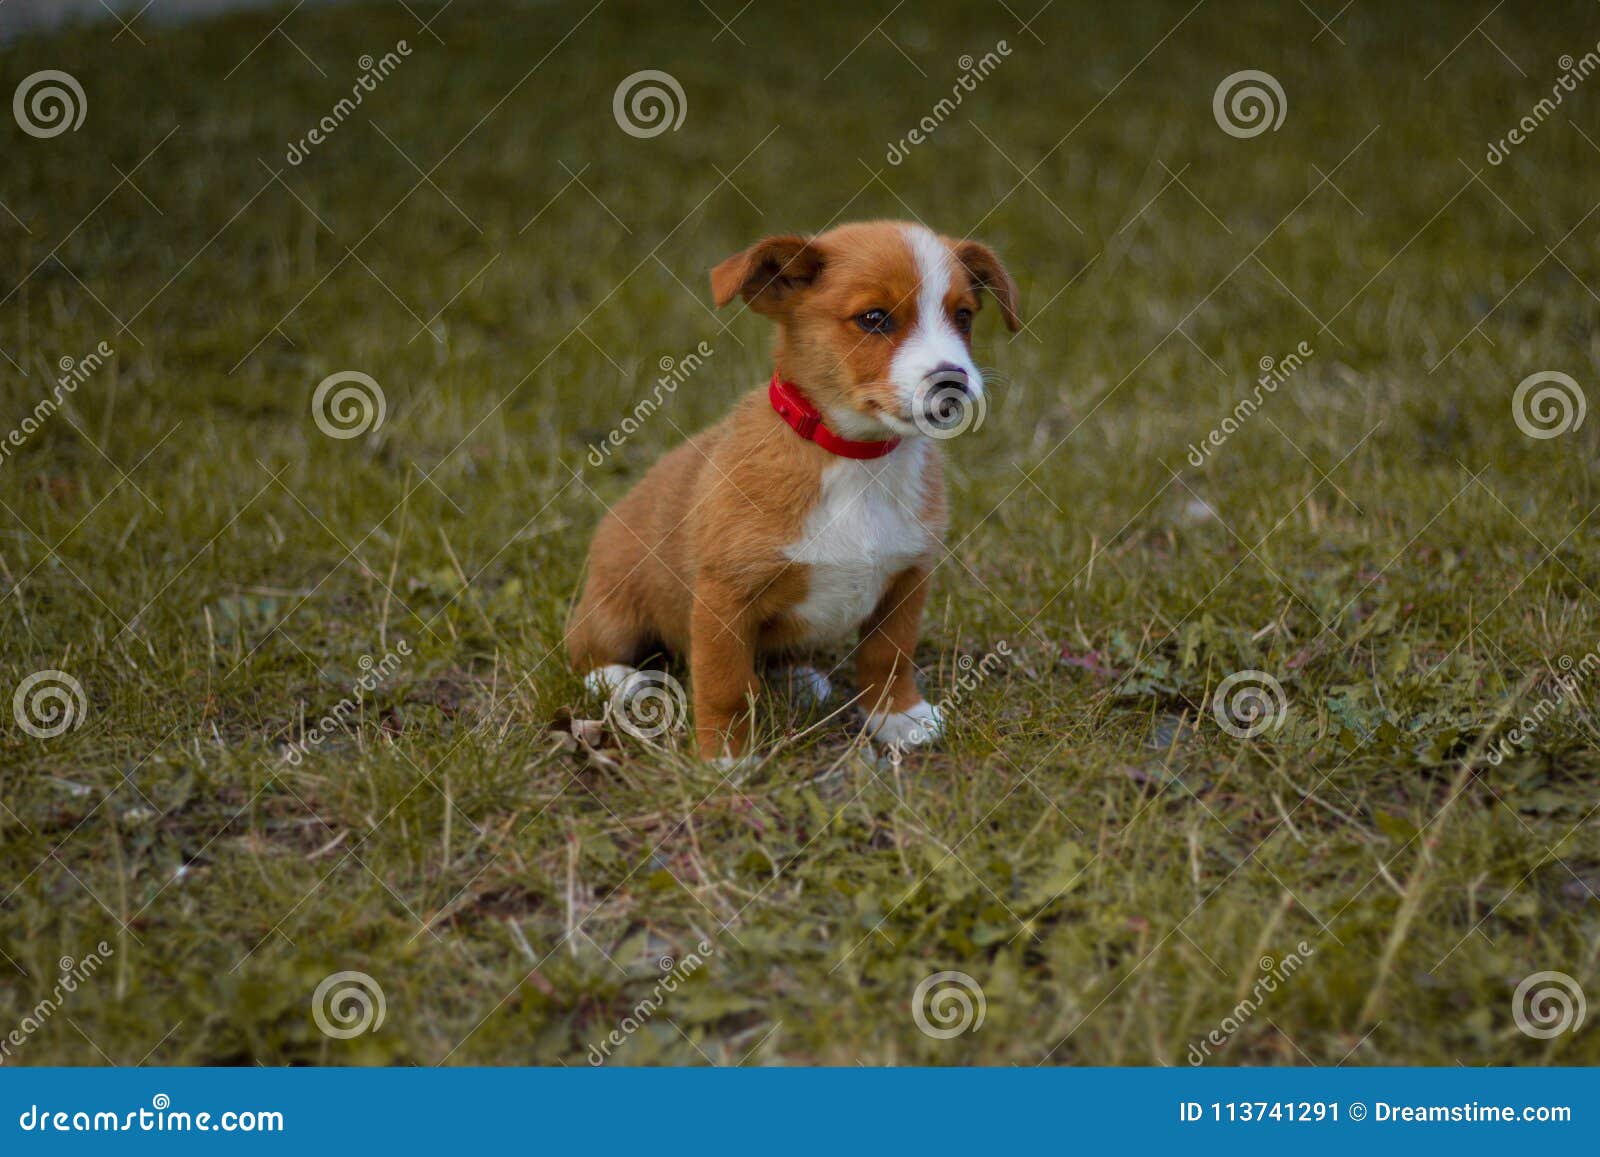 dog, pet, animal, puppy, terrier, cute, jack russell terrier, beagle, canine, grass, white, brown, jack, russell, jack russell, br